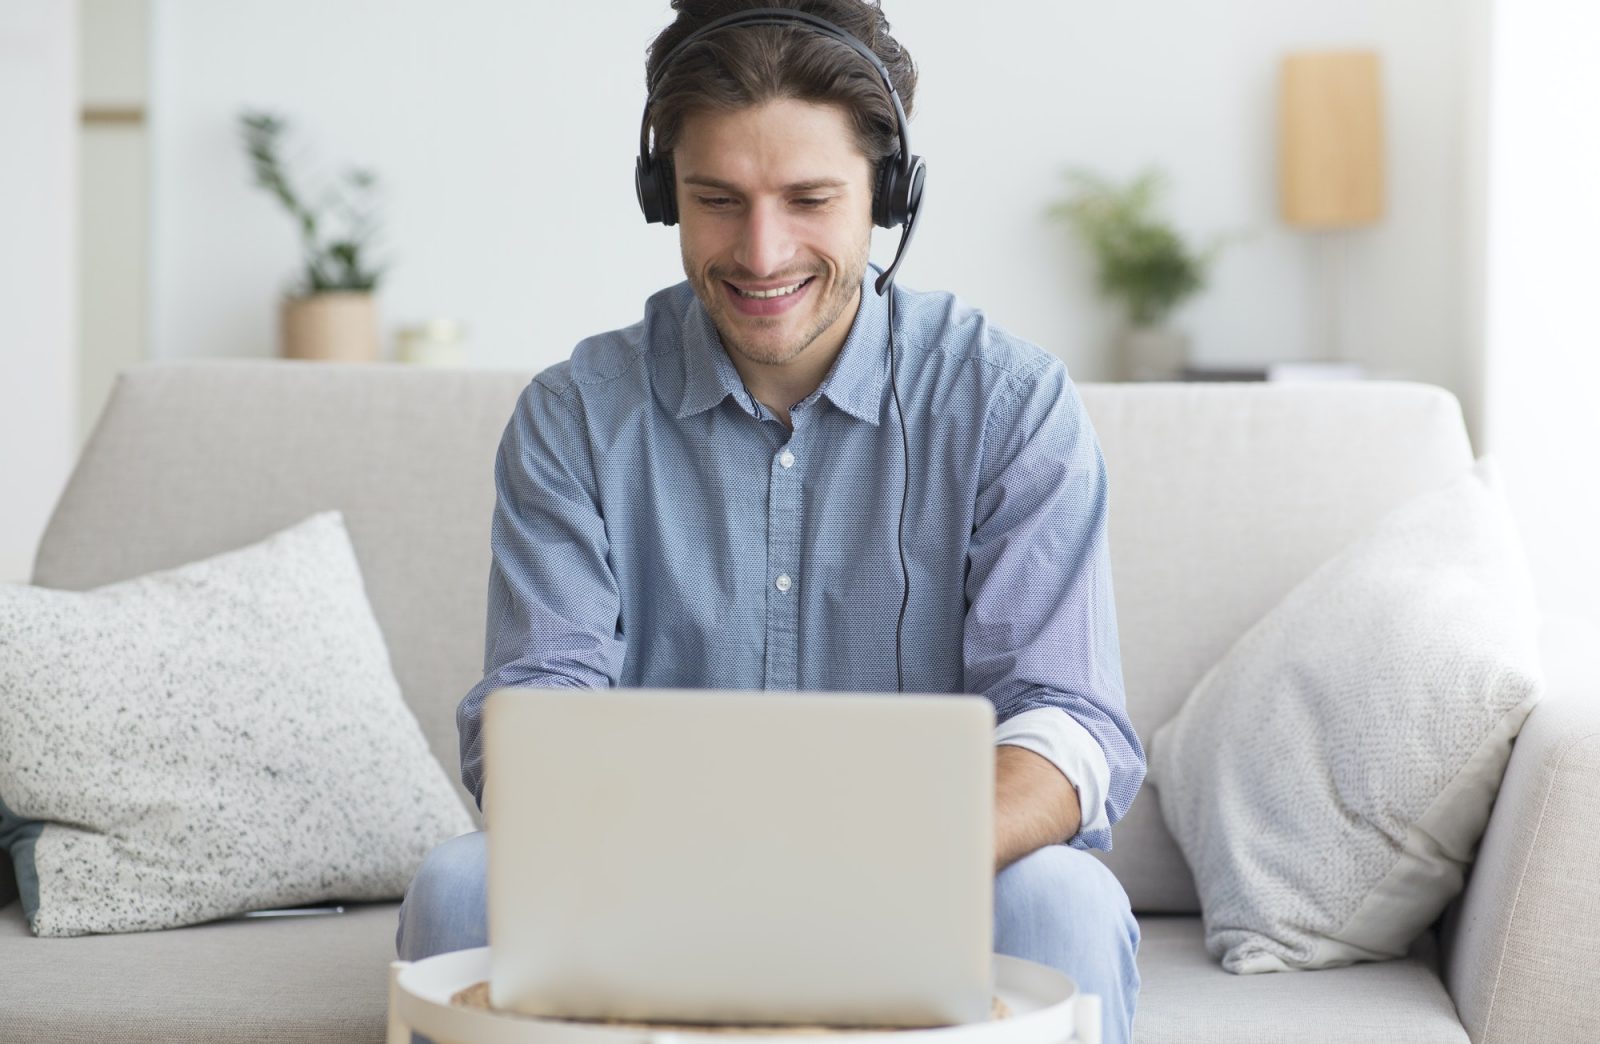 Man In Earphones Using Laptop Listening To Podcast At Home